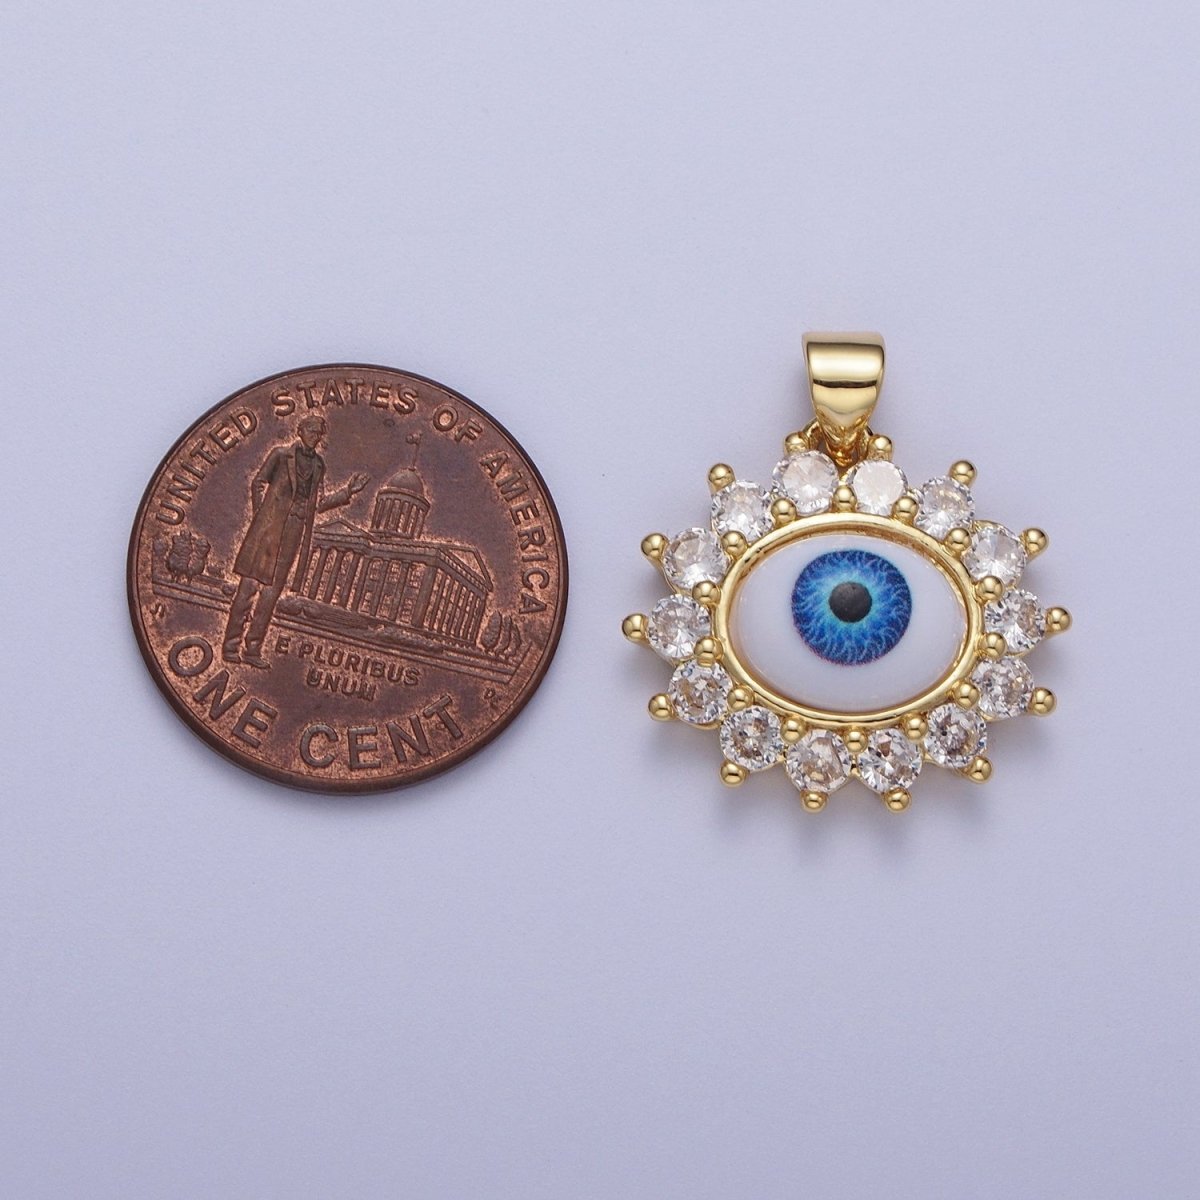 Blue Evil Eye of Ra Round Cubic Zirconia Gold Pendant For Protection Jewelry Making H-572 - DLUXCA